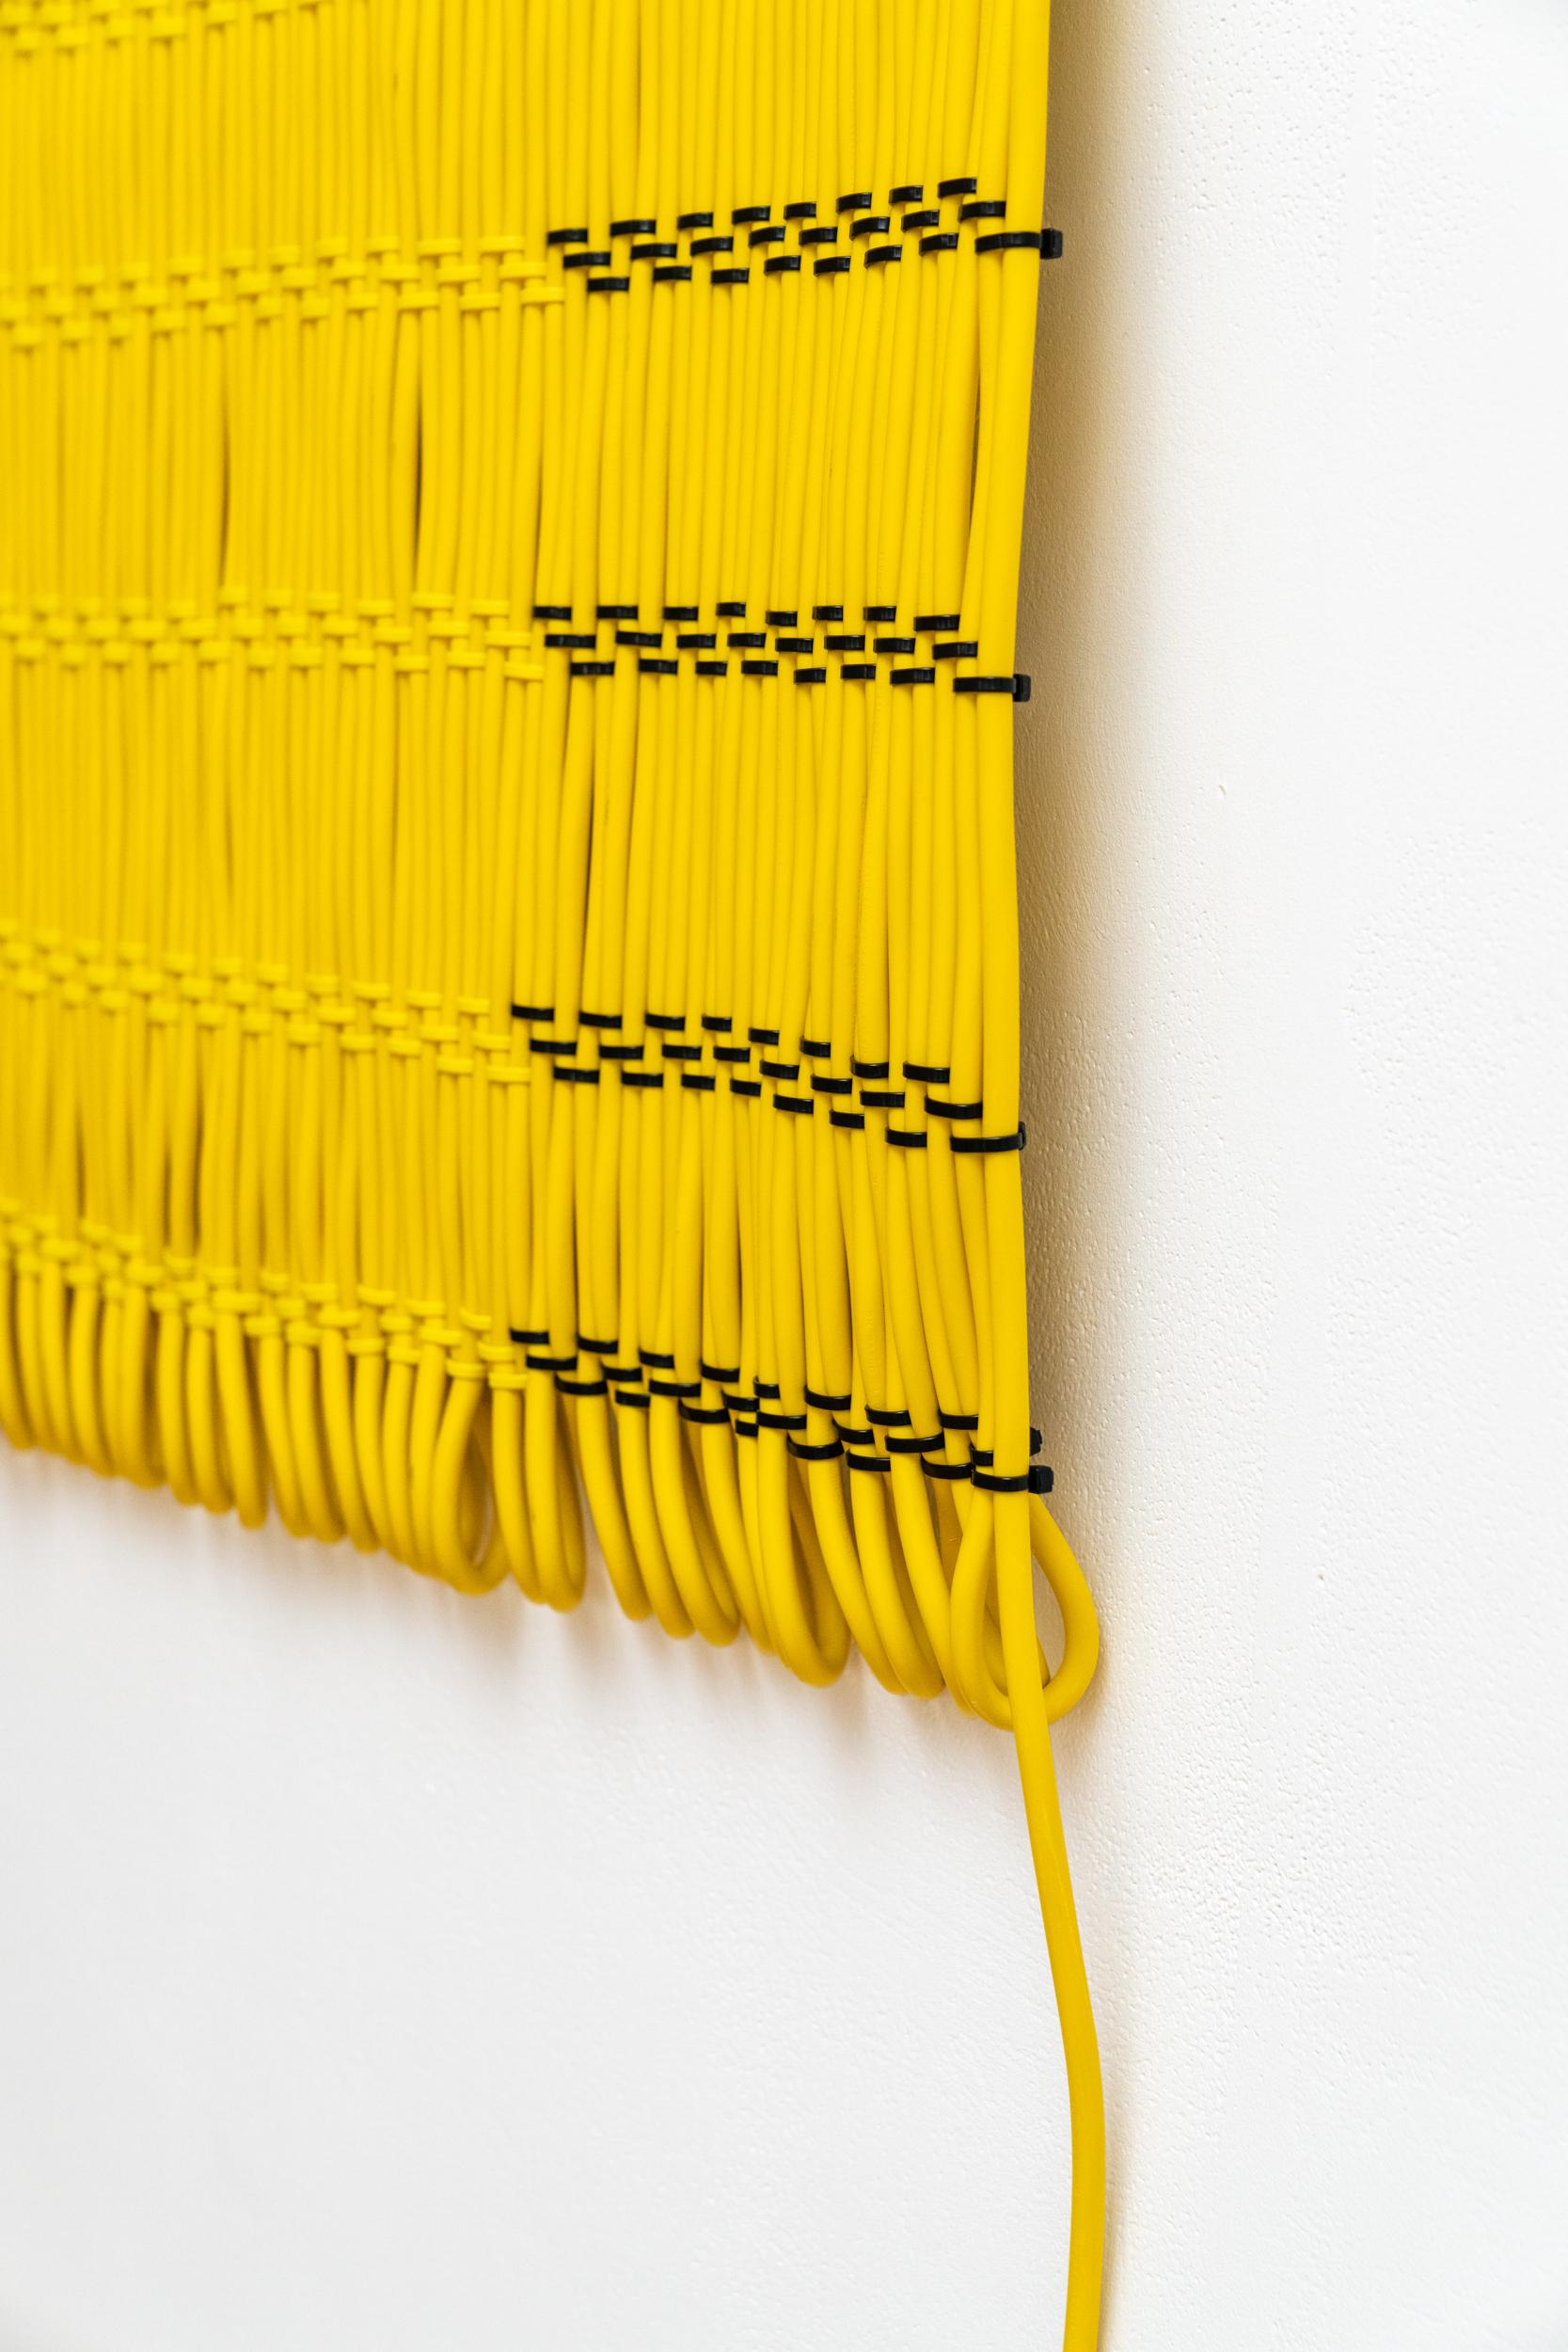 Post-Modern Yellow & Black 100 Meter Cable Wall Rug / Tapestry For Sale